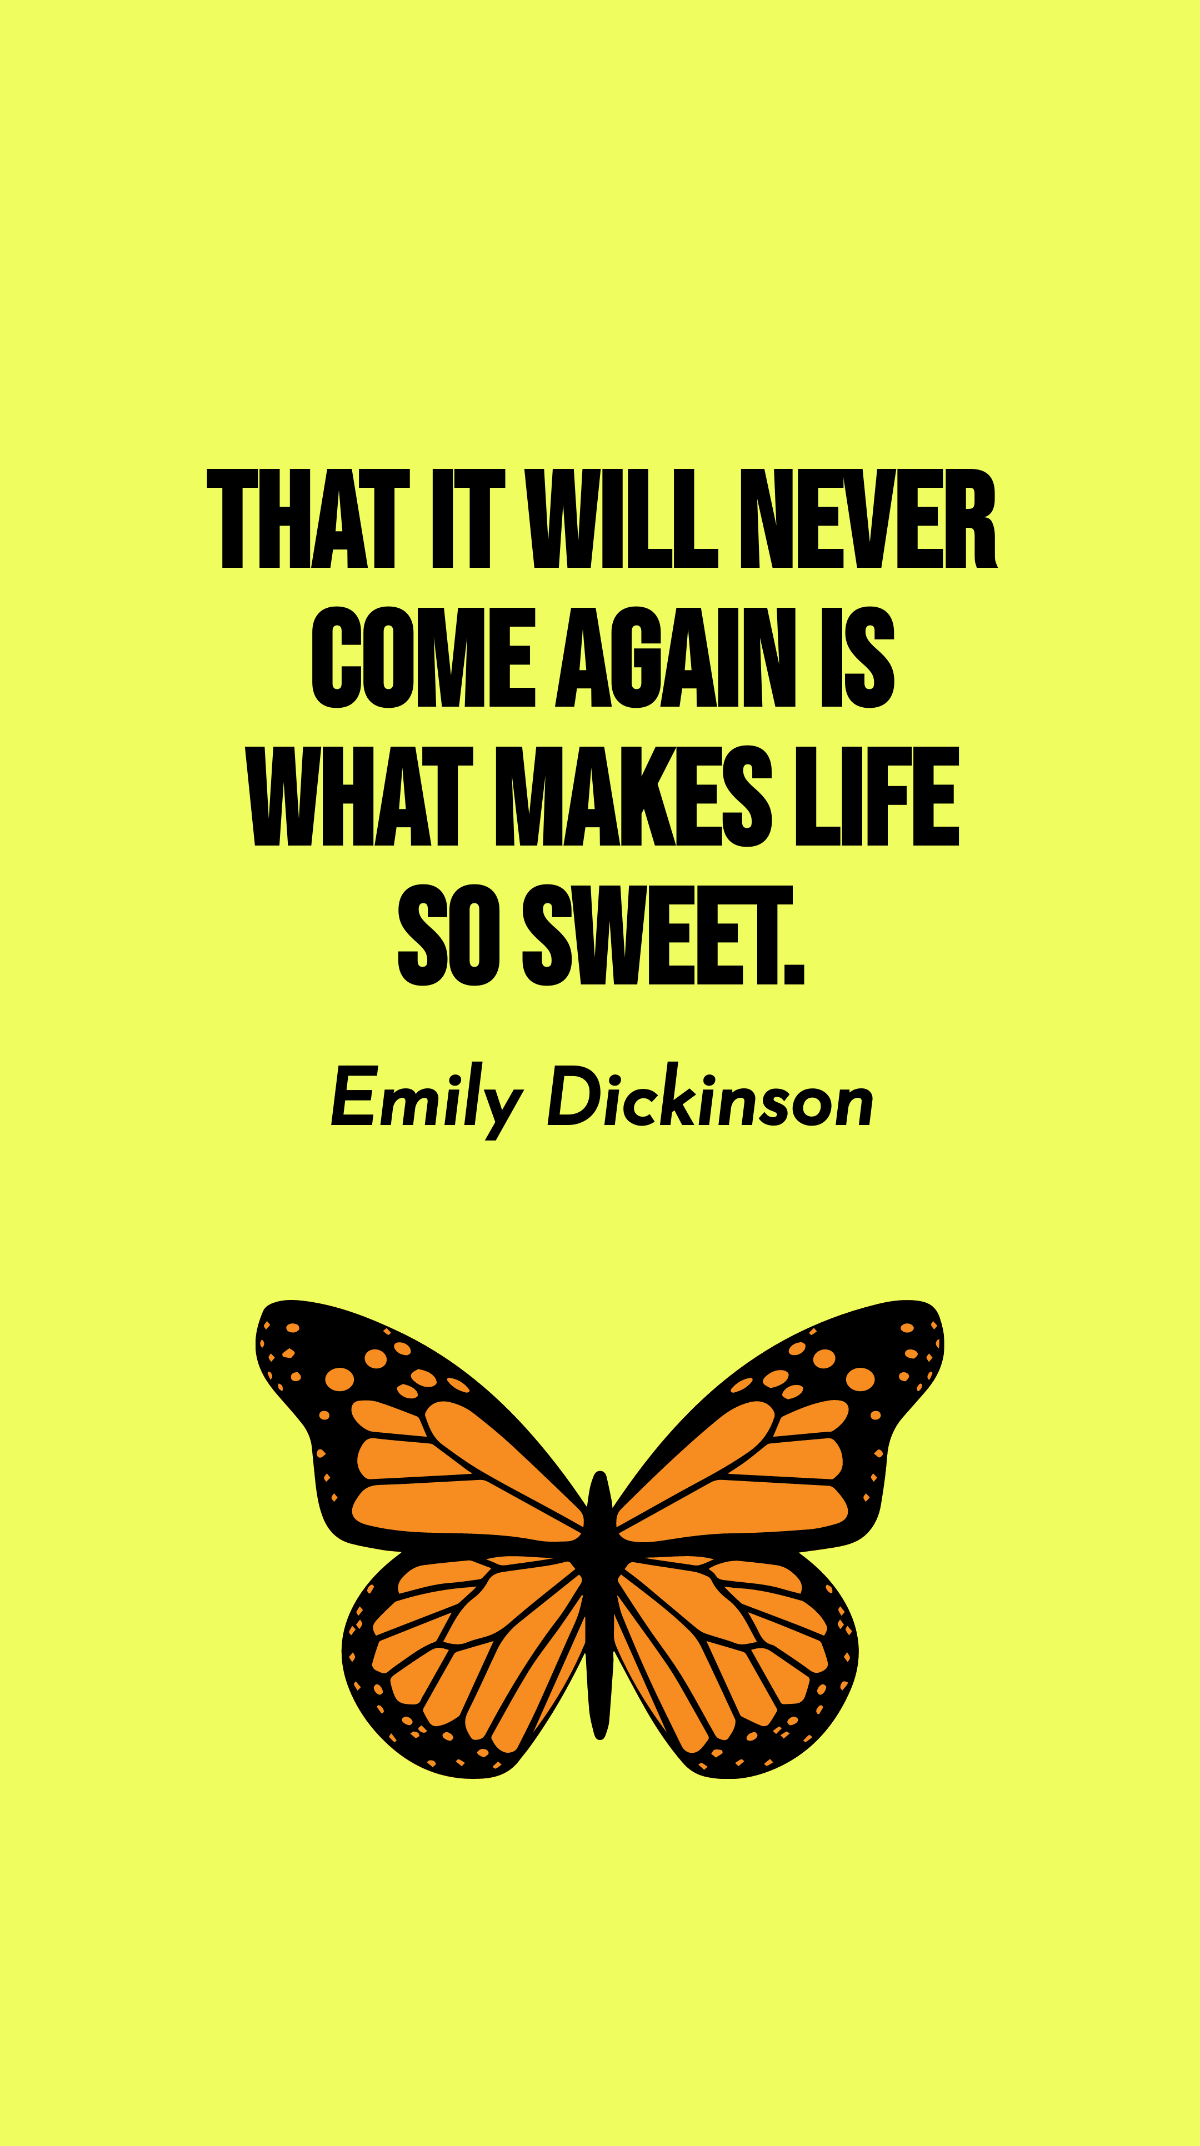 Emily Dickinson - That it will never come again is what makes life so sweet. Template